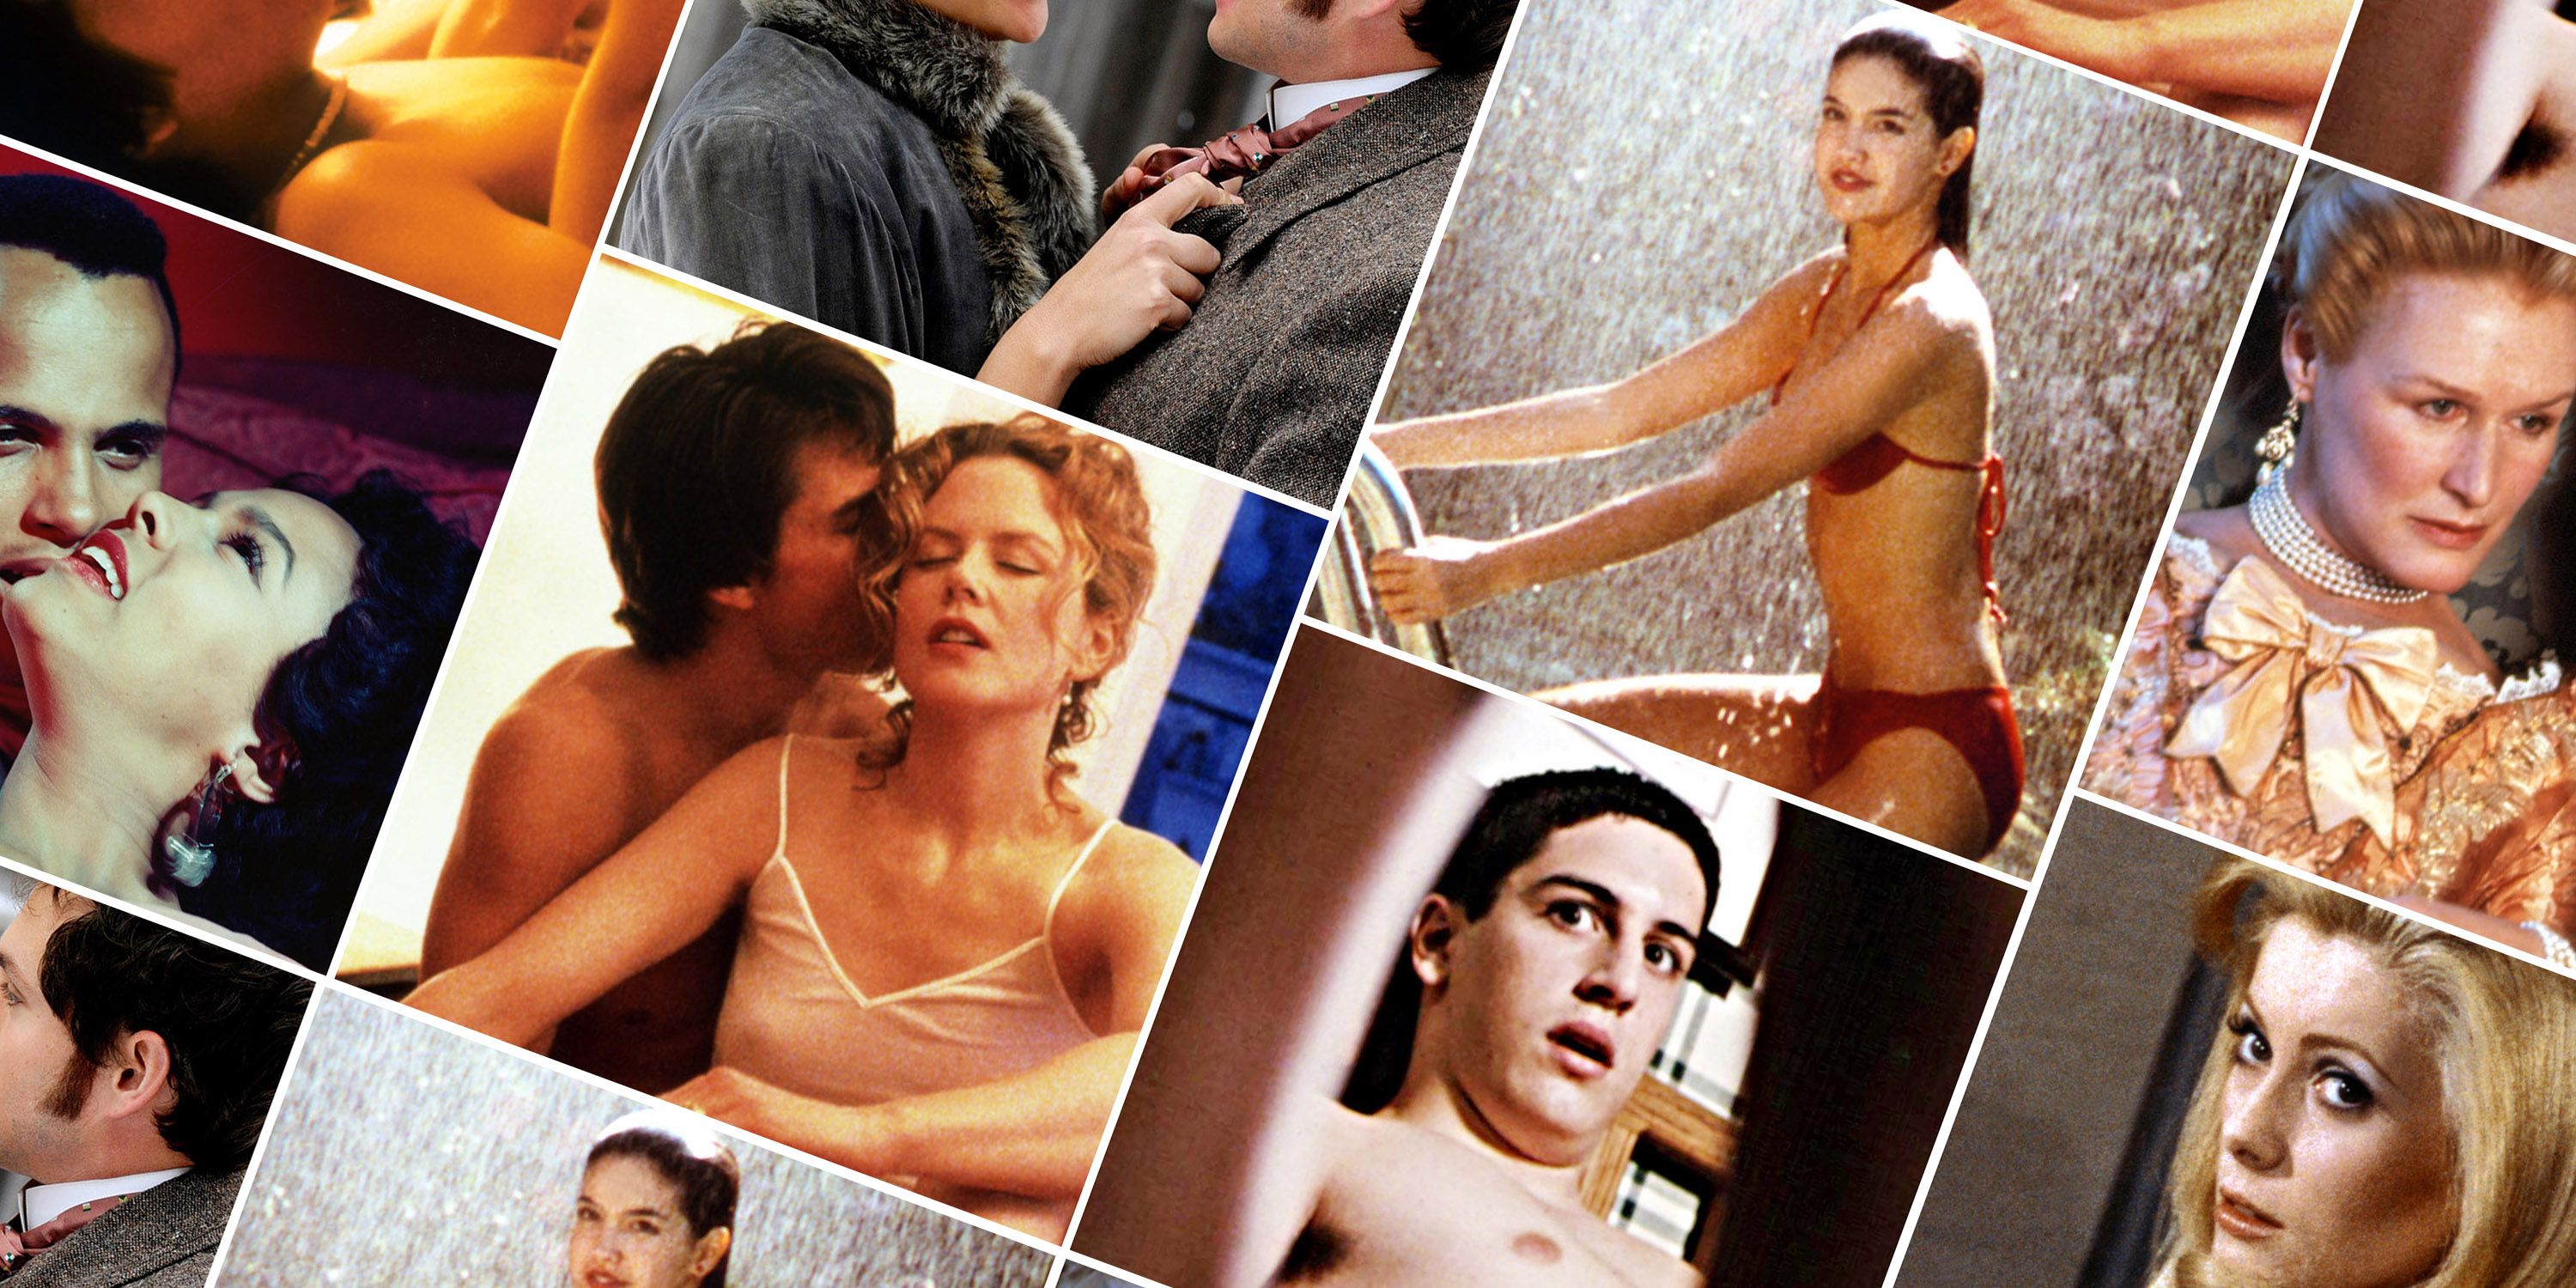 35 Best Movies About Sex of All Time - Hottest Sex Films Ever Made